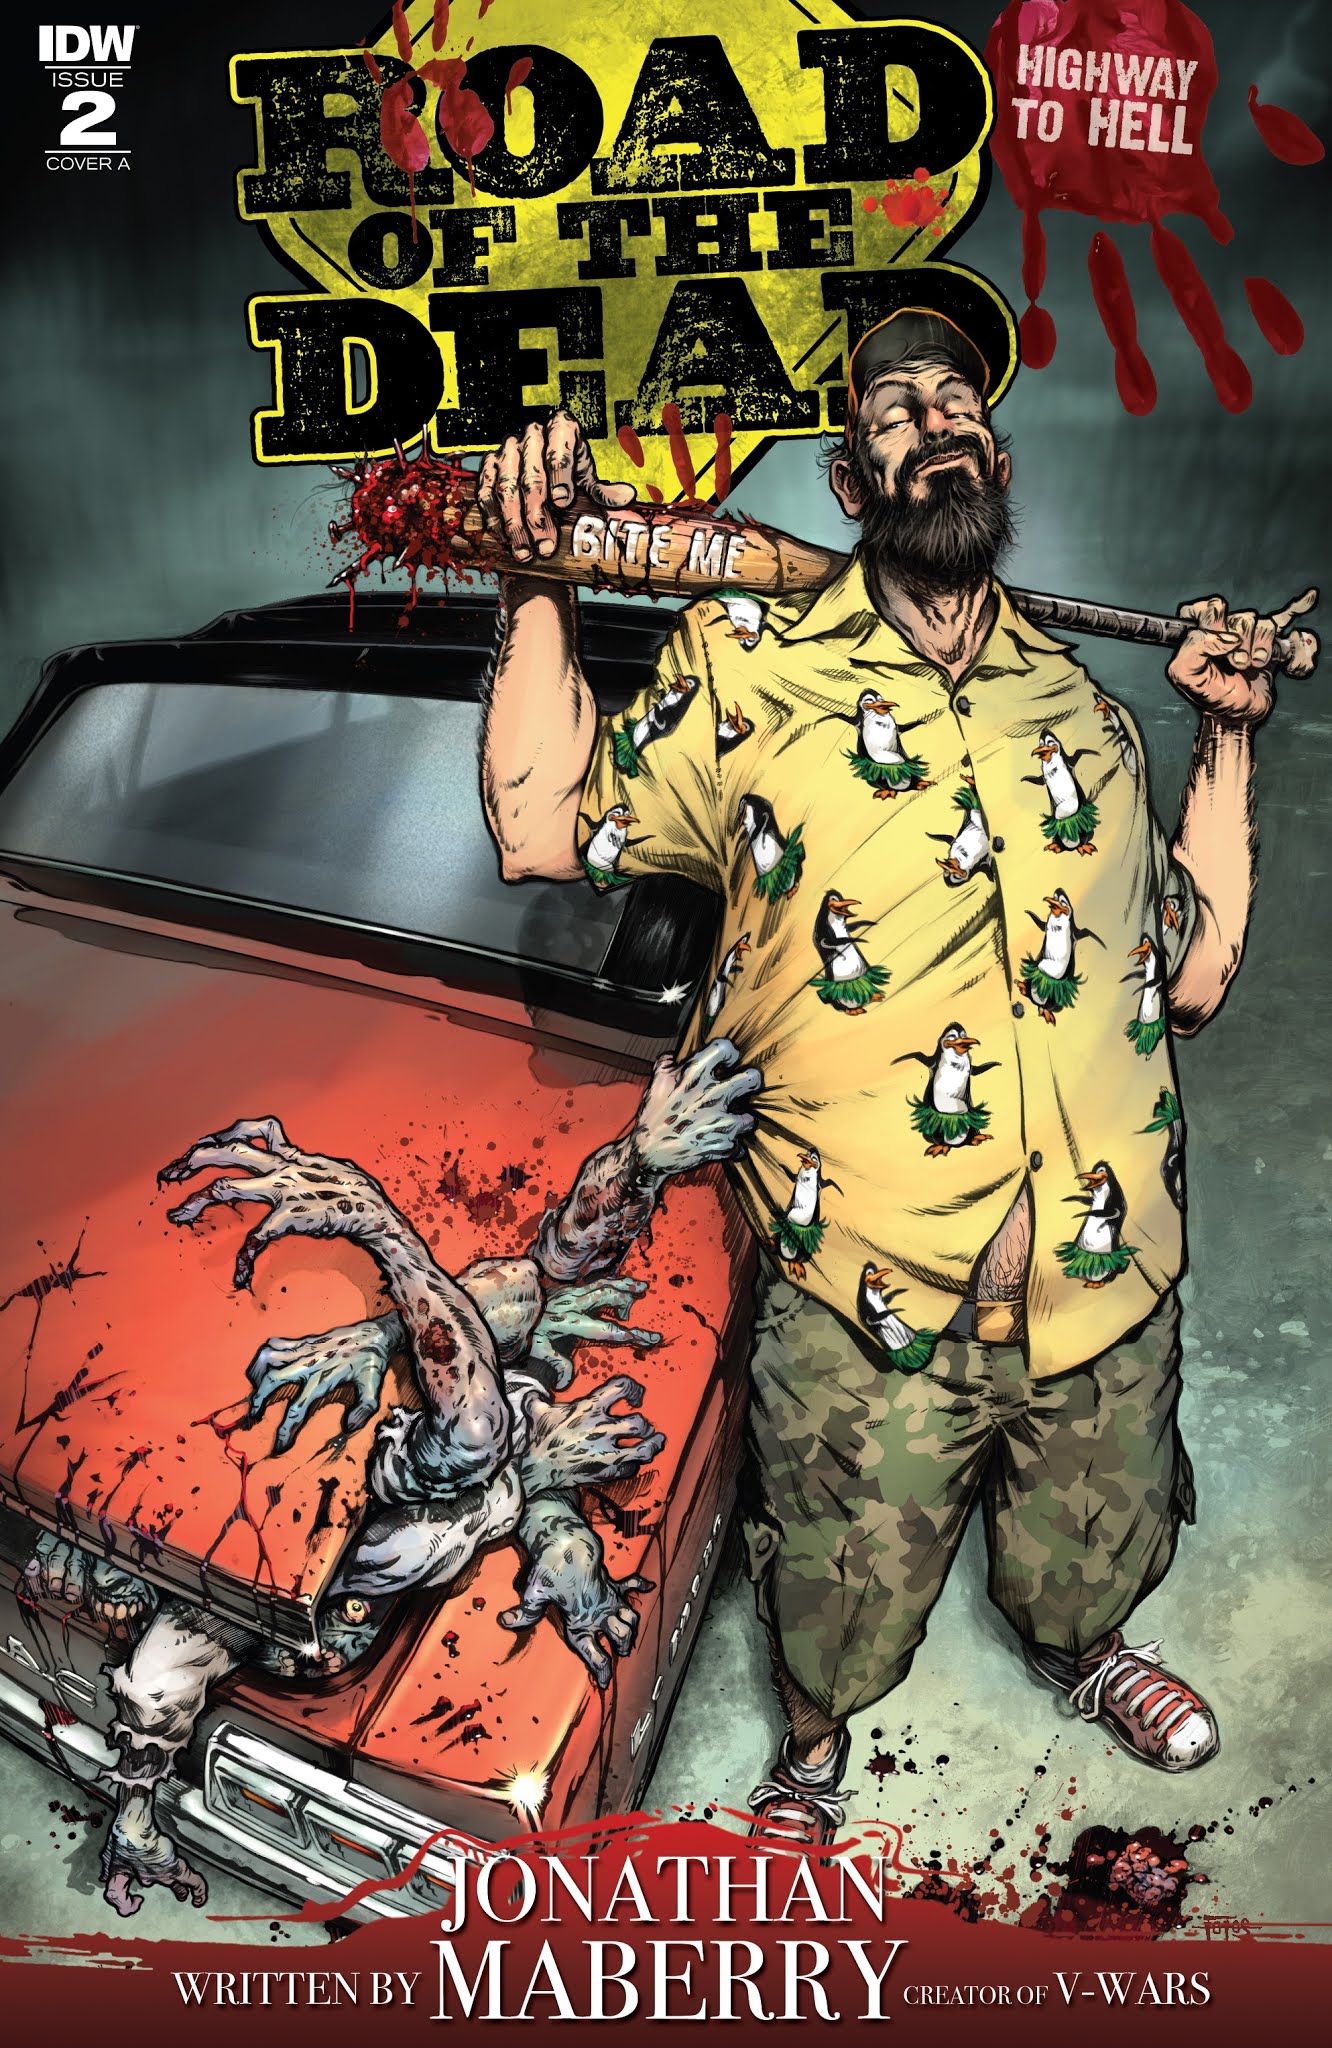 Read online Road of the Dead: Highway To Hell comic -  Issue #2 - 1